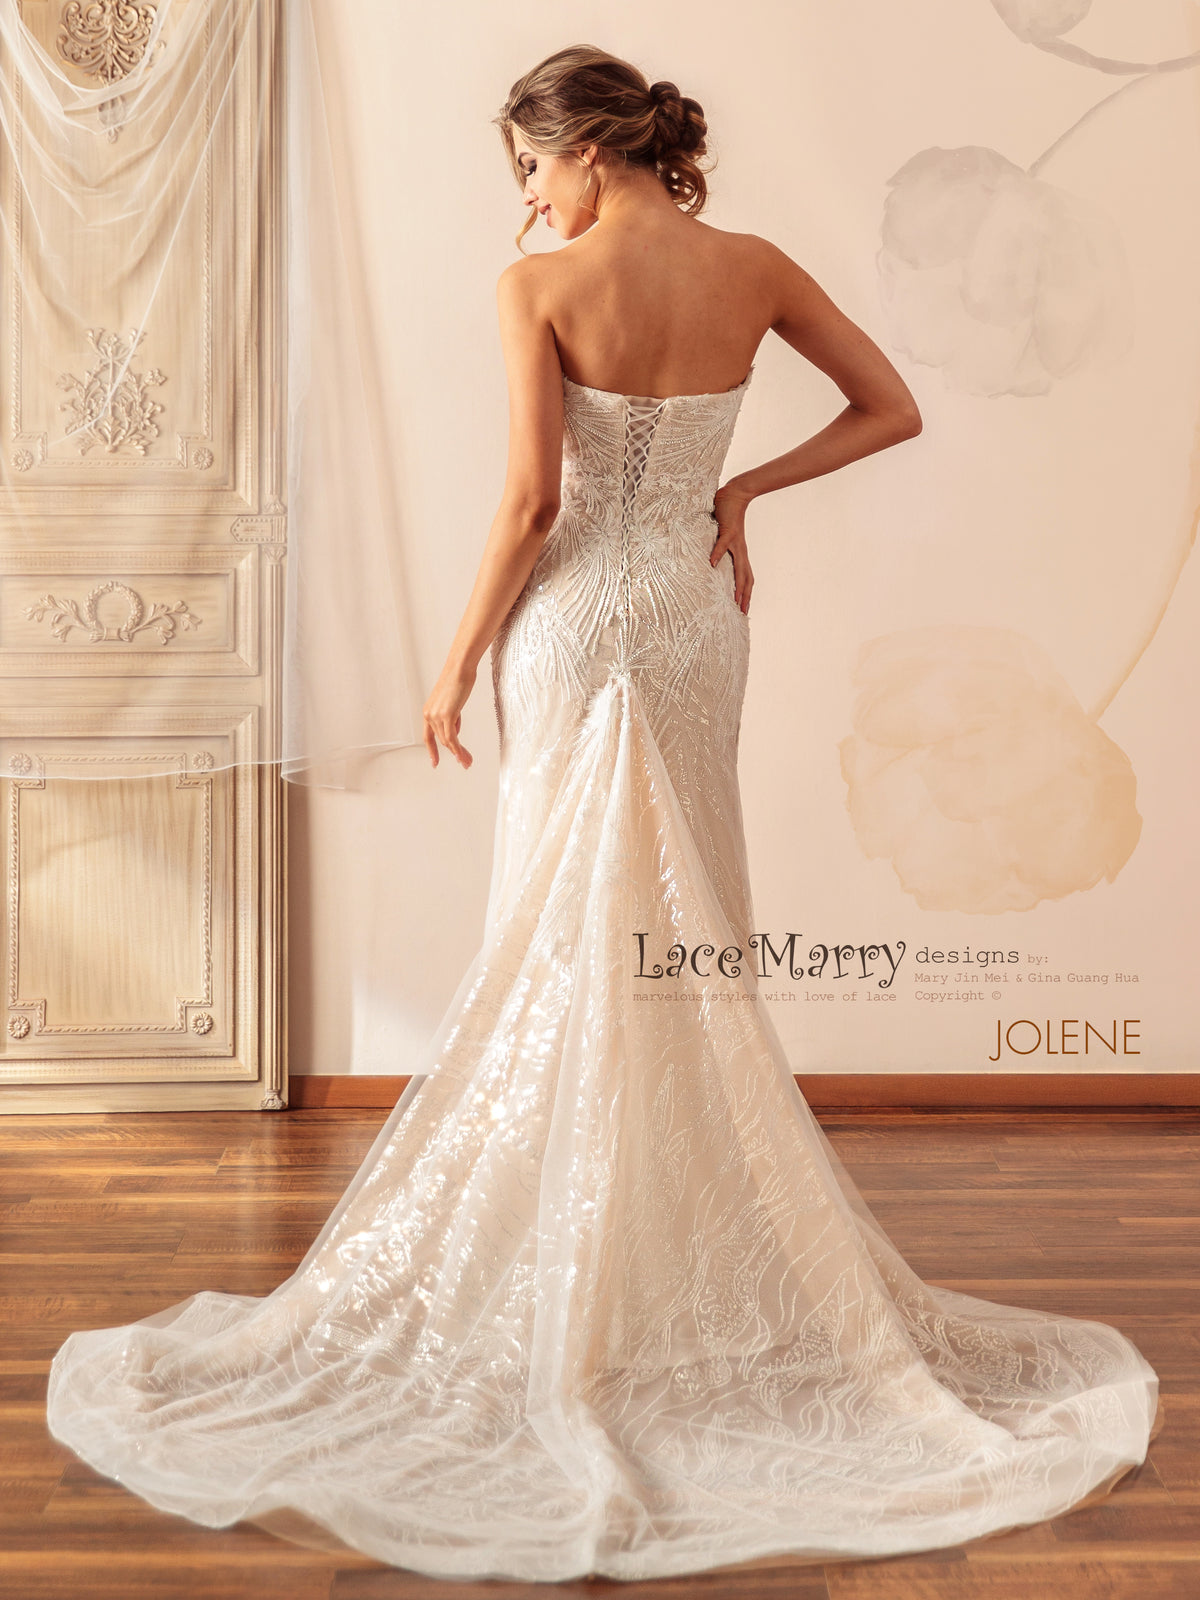 JOLENE / Strapless Wedding Dress with Plunge Neckline and Beaded Appliques